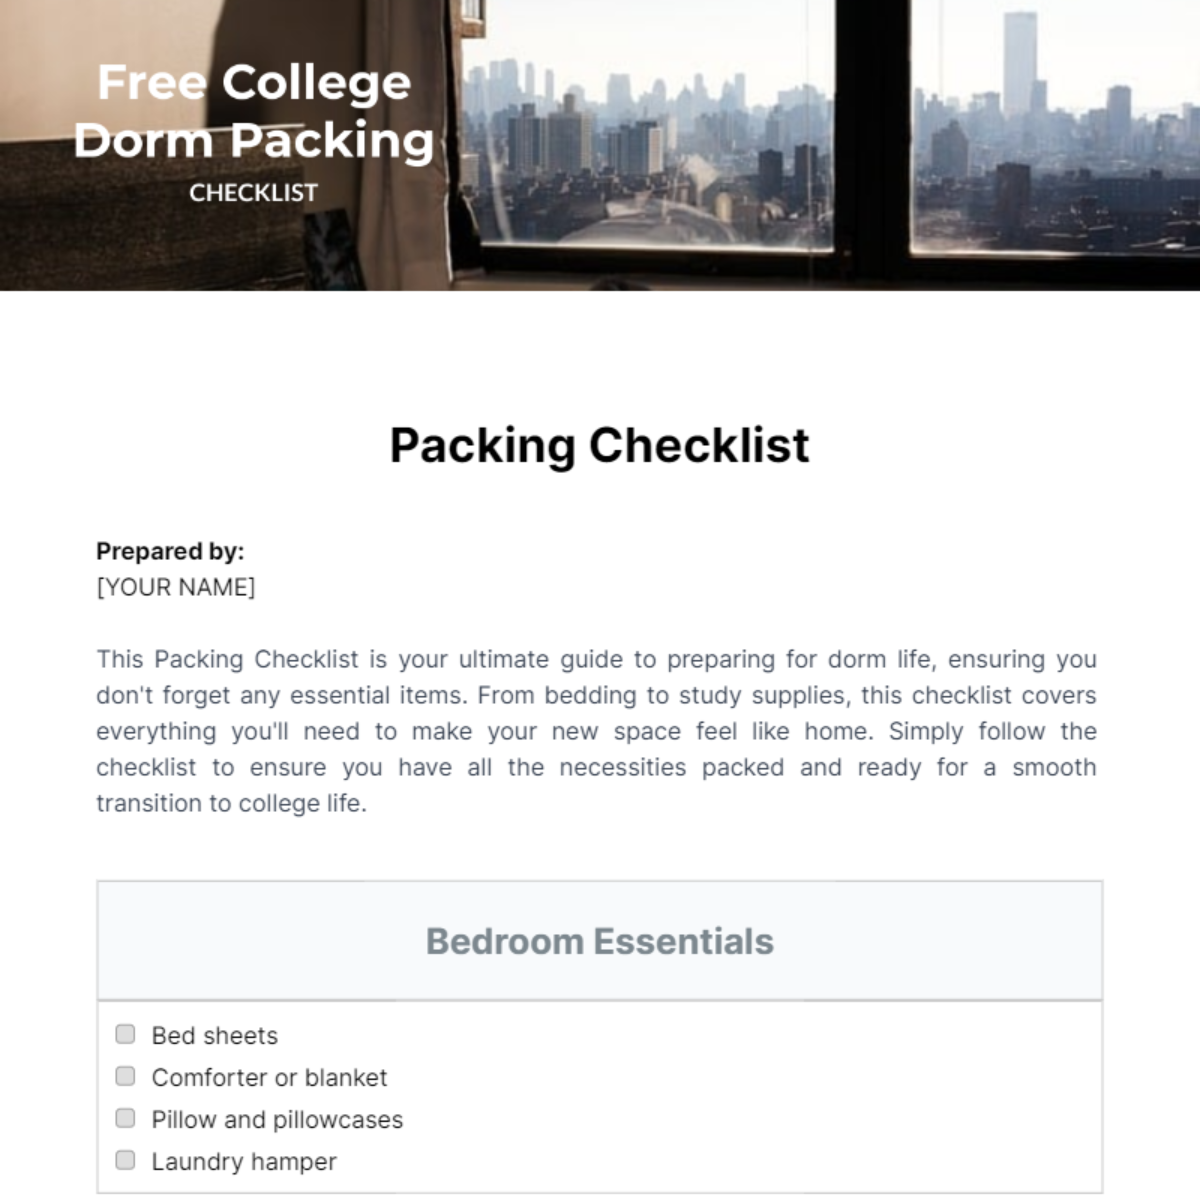 Free College Dorm Packing Checklist Template